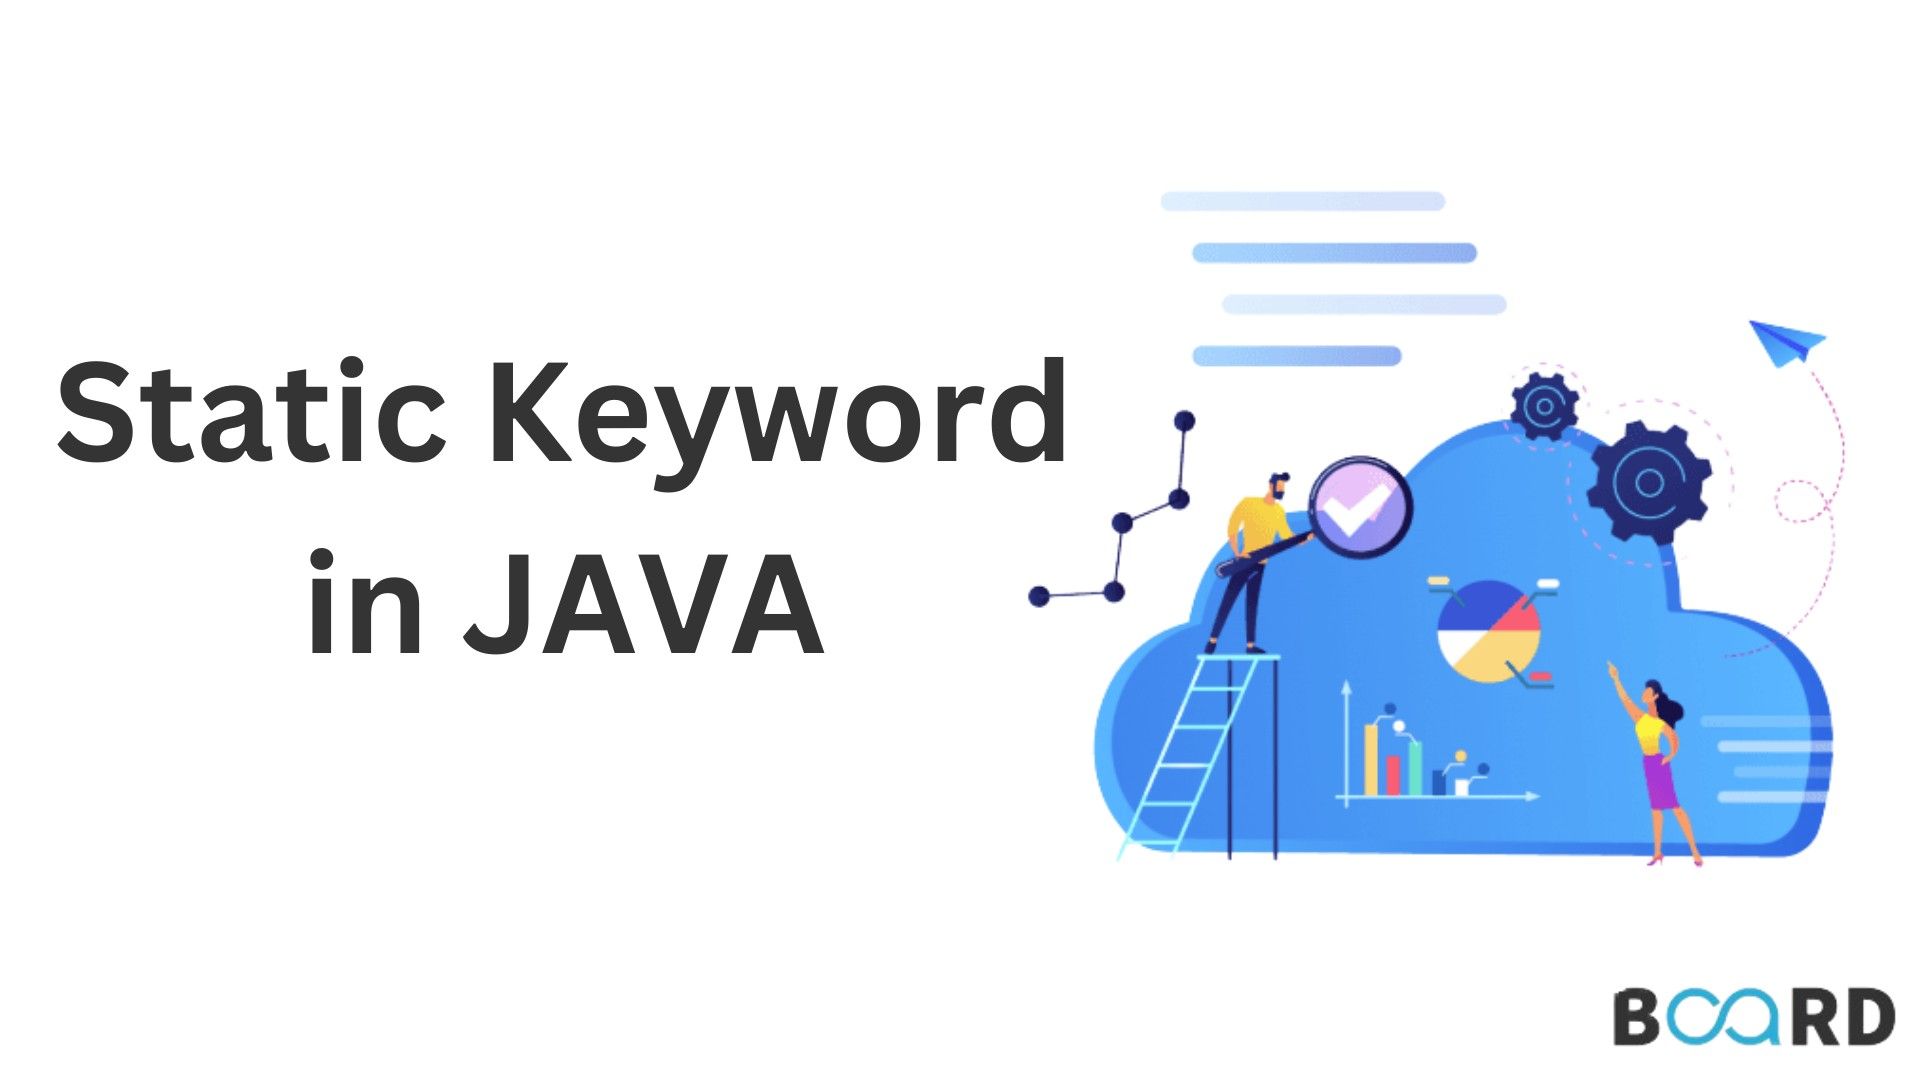 Introduction to Static Keyword in JAVA